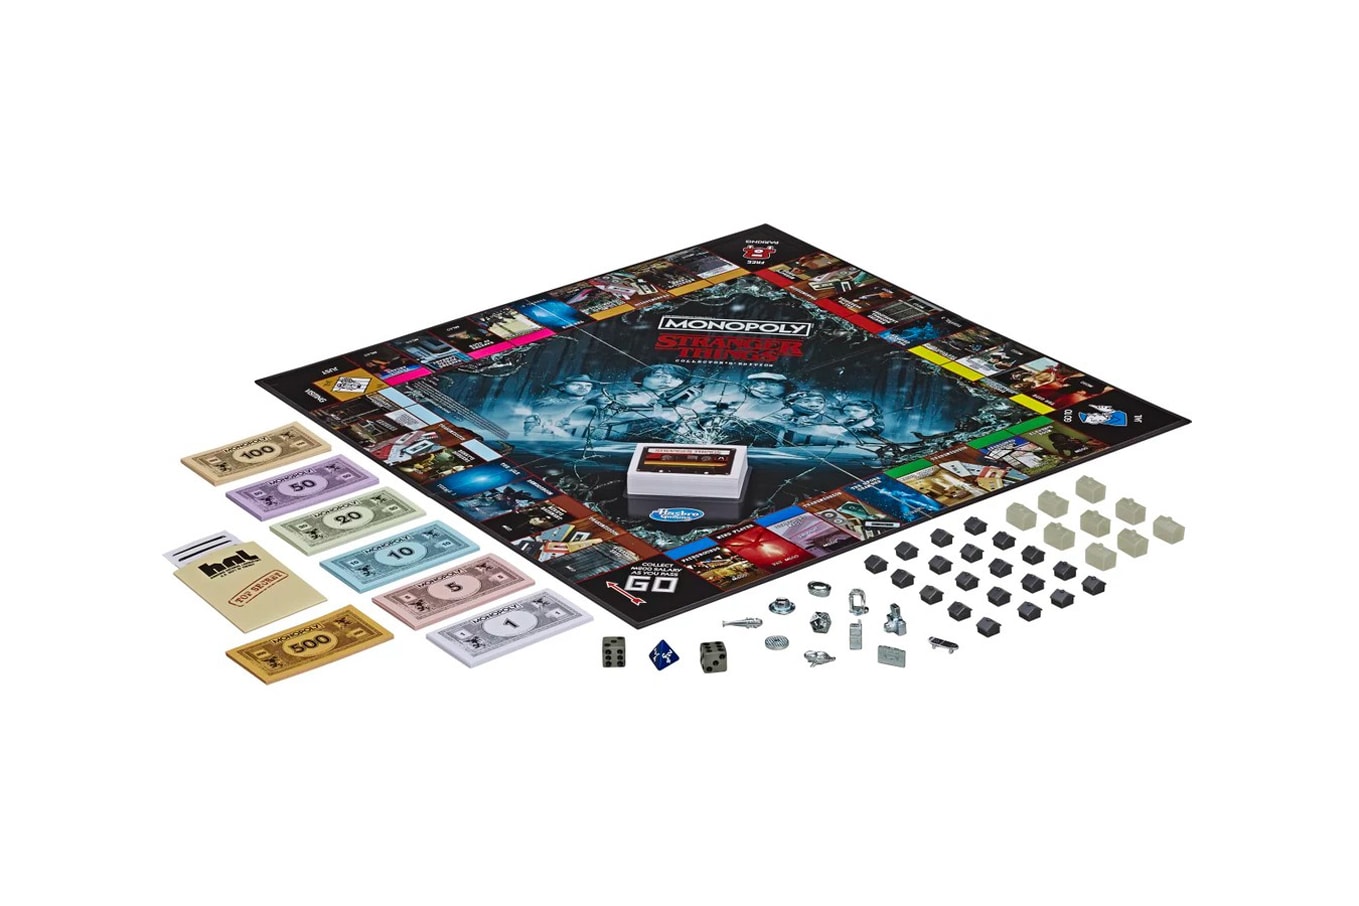 Monopoly Stranger Things Collector's Edition